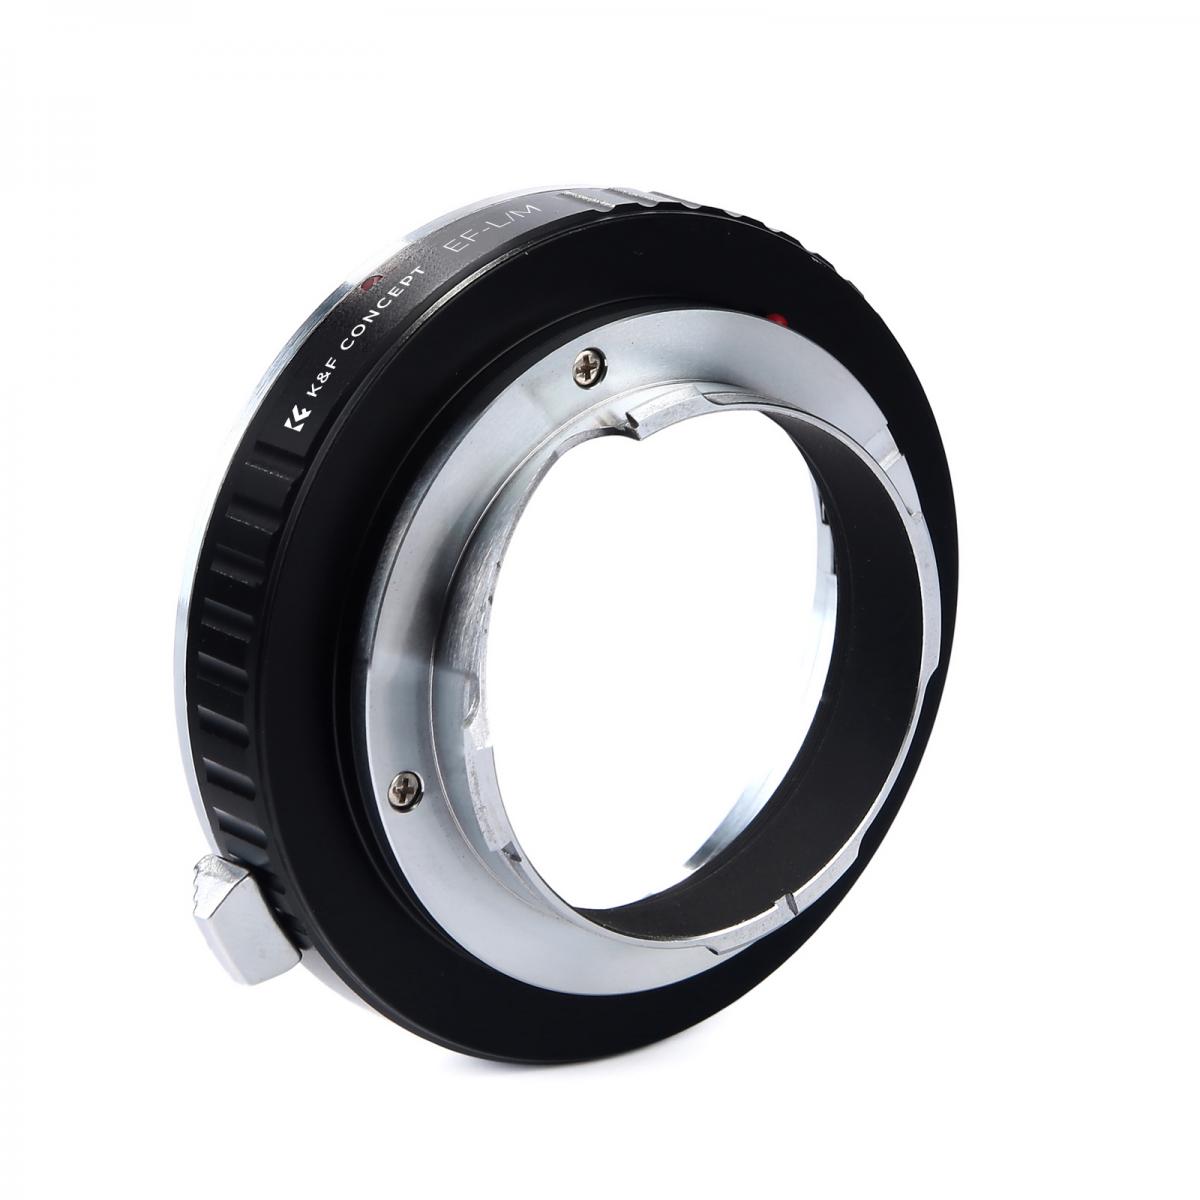 Canon EOS EF Lenses to Leica M Lens Mount Adapter K&F Concept M12151 Lens Adapter